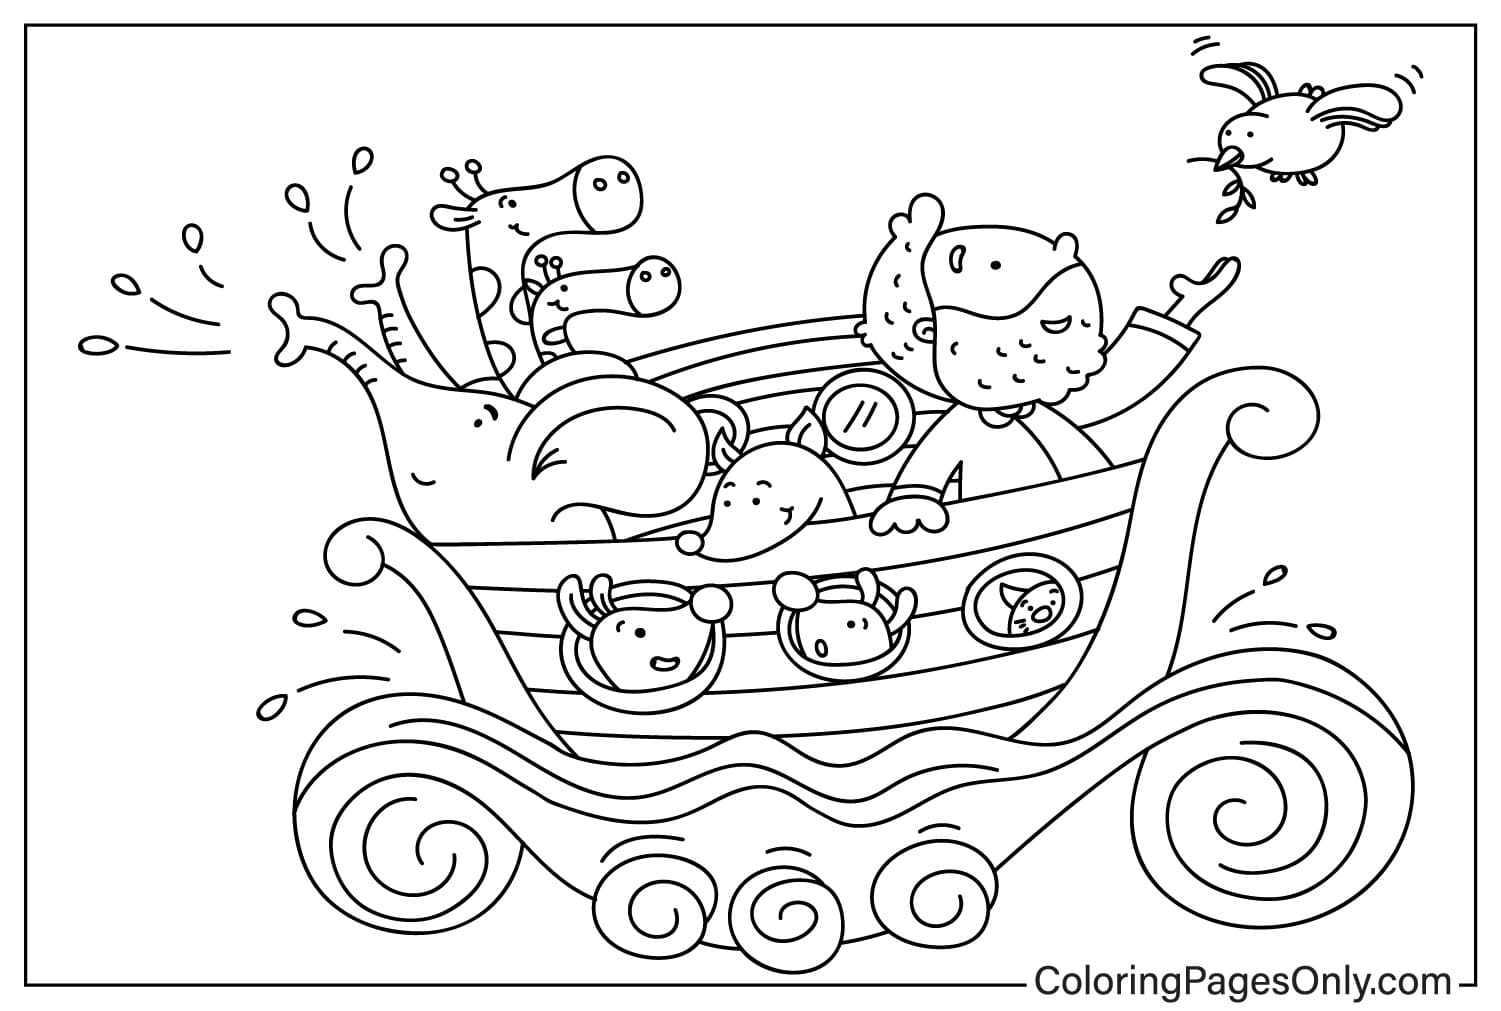 Simple Noah’s Ark Before the Flood Coloring Page for Preschoolers from Noah’s Ark